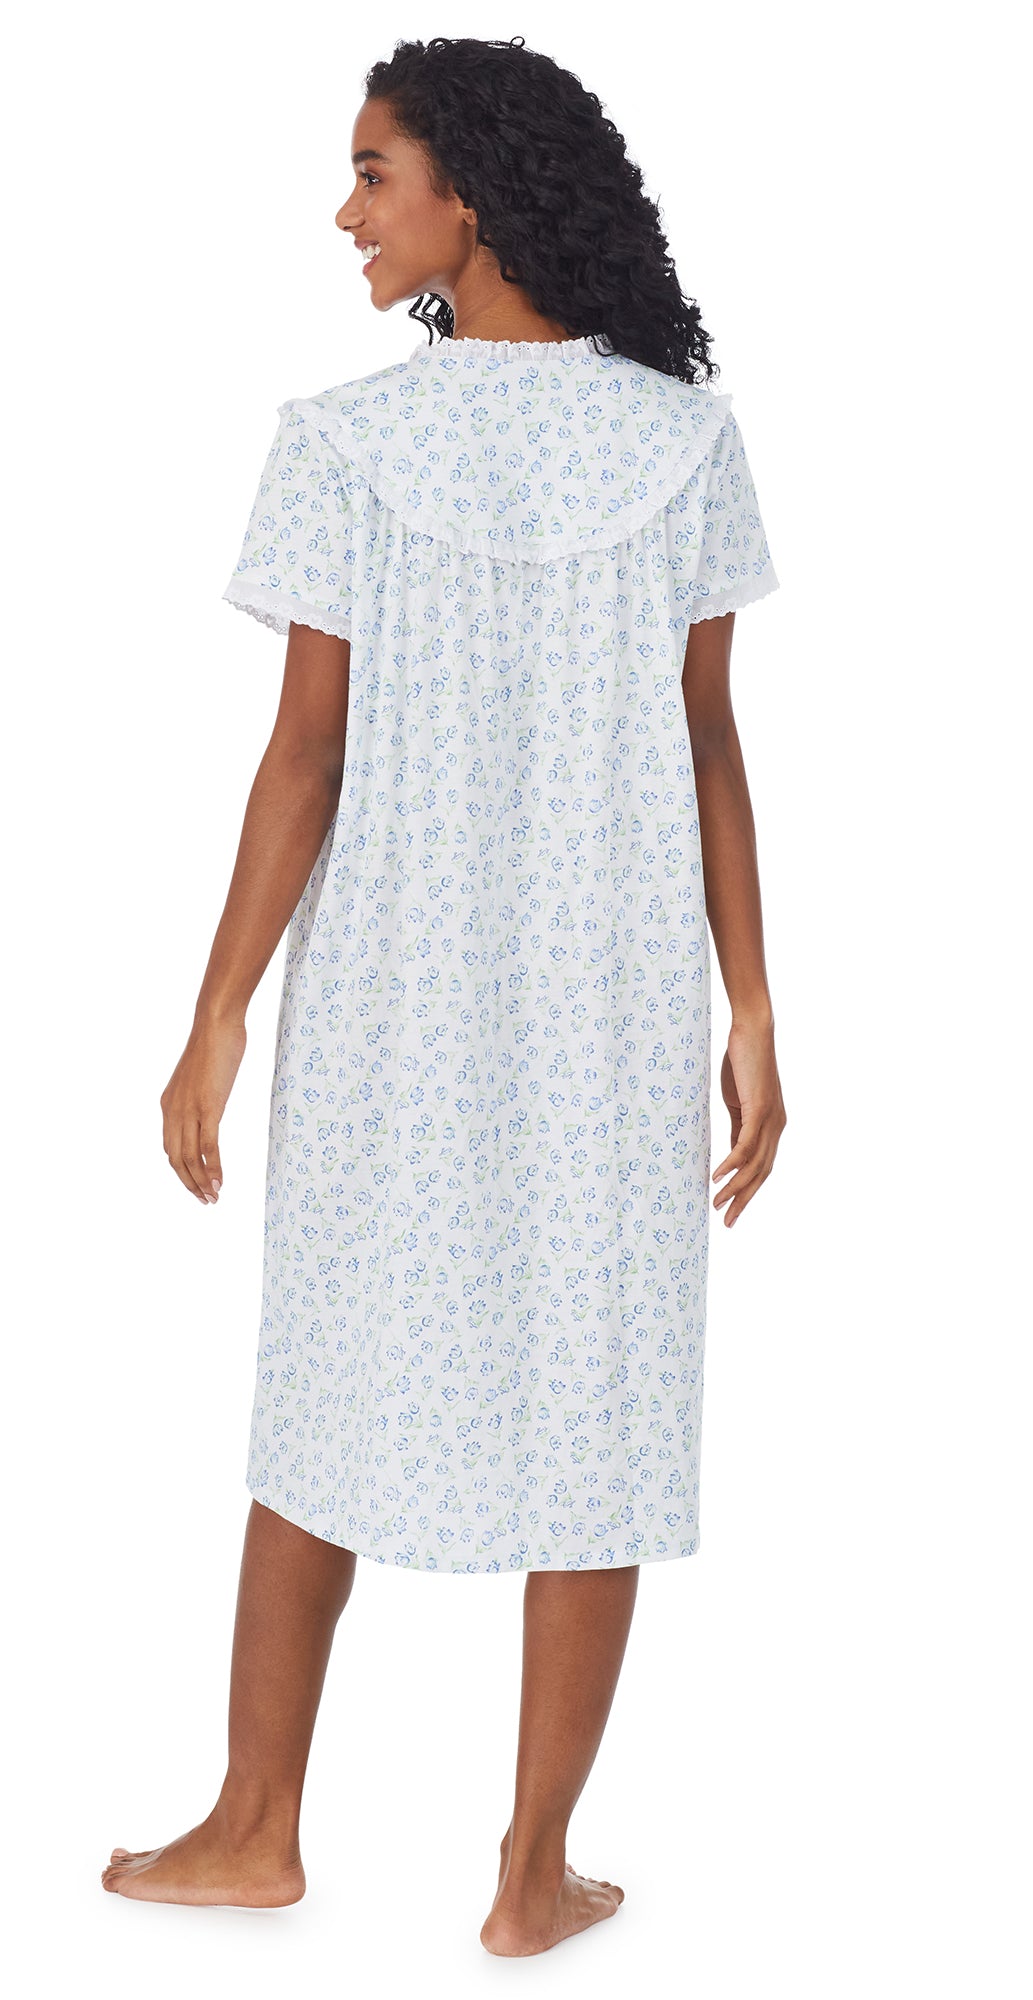 A lady wearing white waltz nightgown with blue floral design